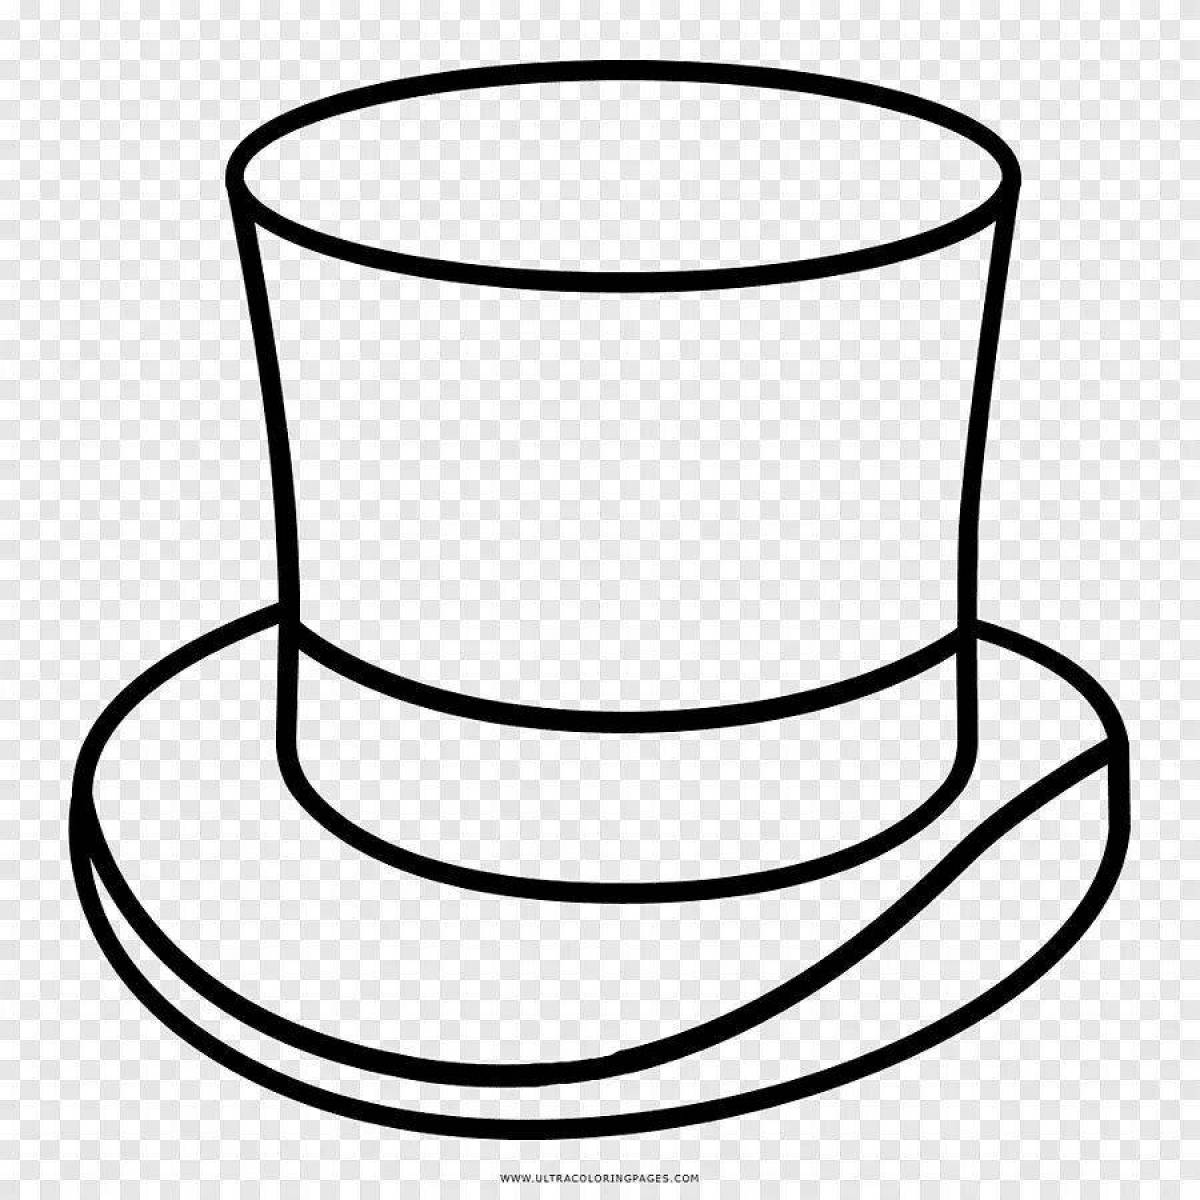 Coloring book shining top hat